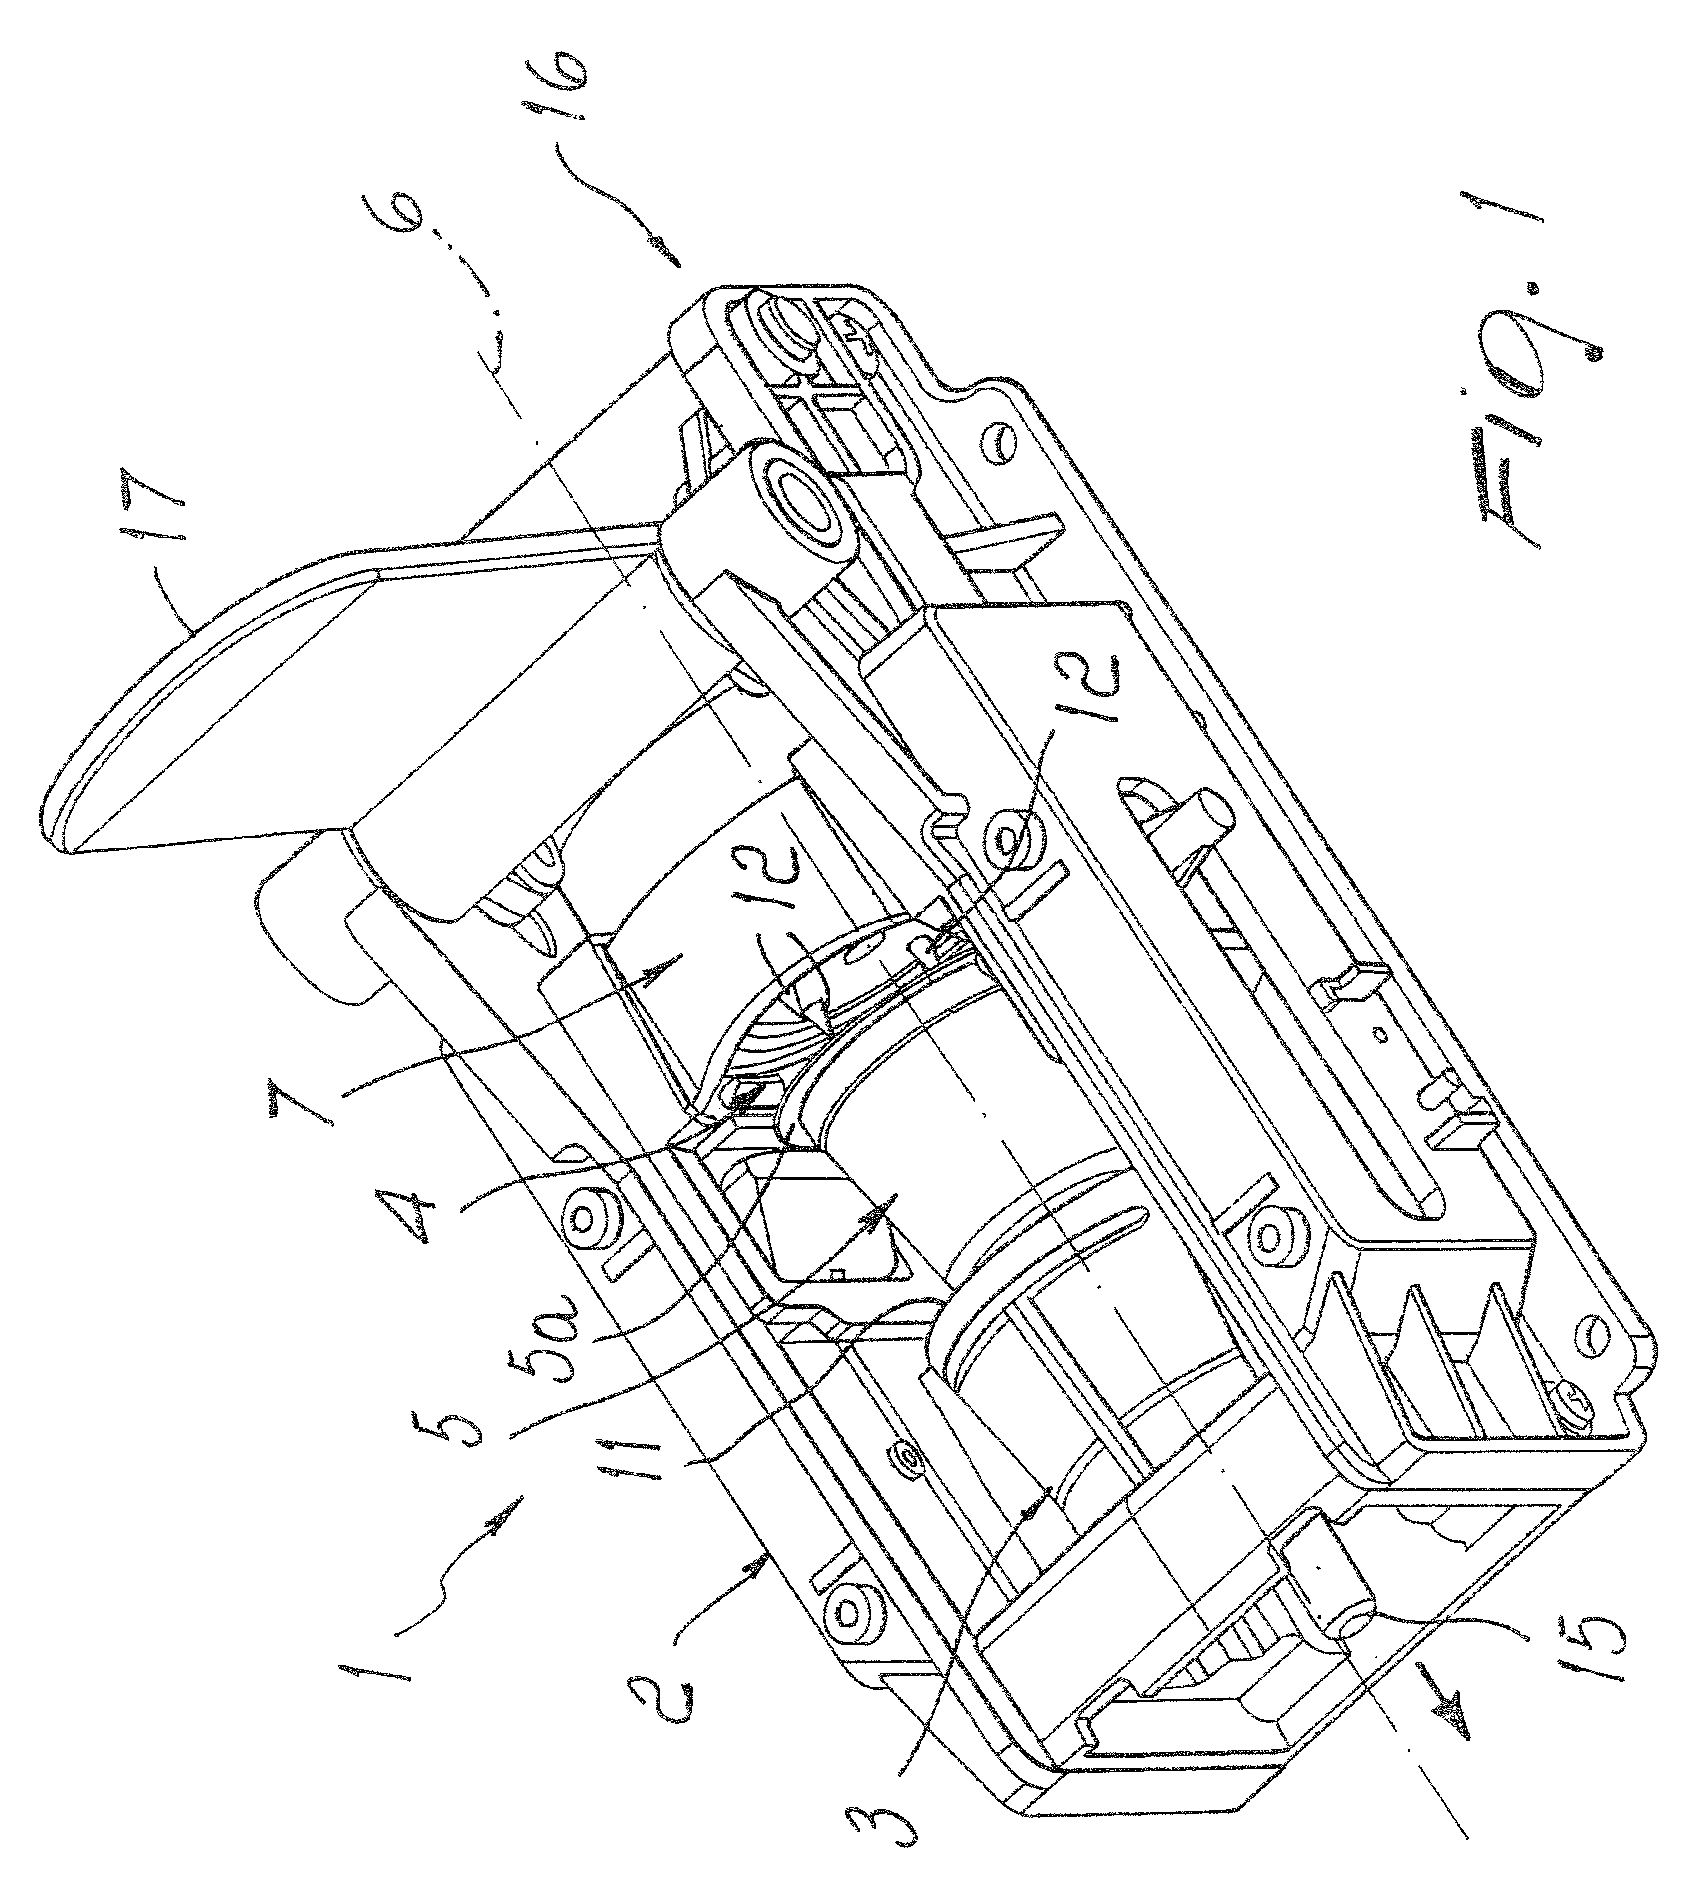 Infusion device for infusion capsules and the like, particularly for espresso coffee machines and the like